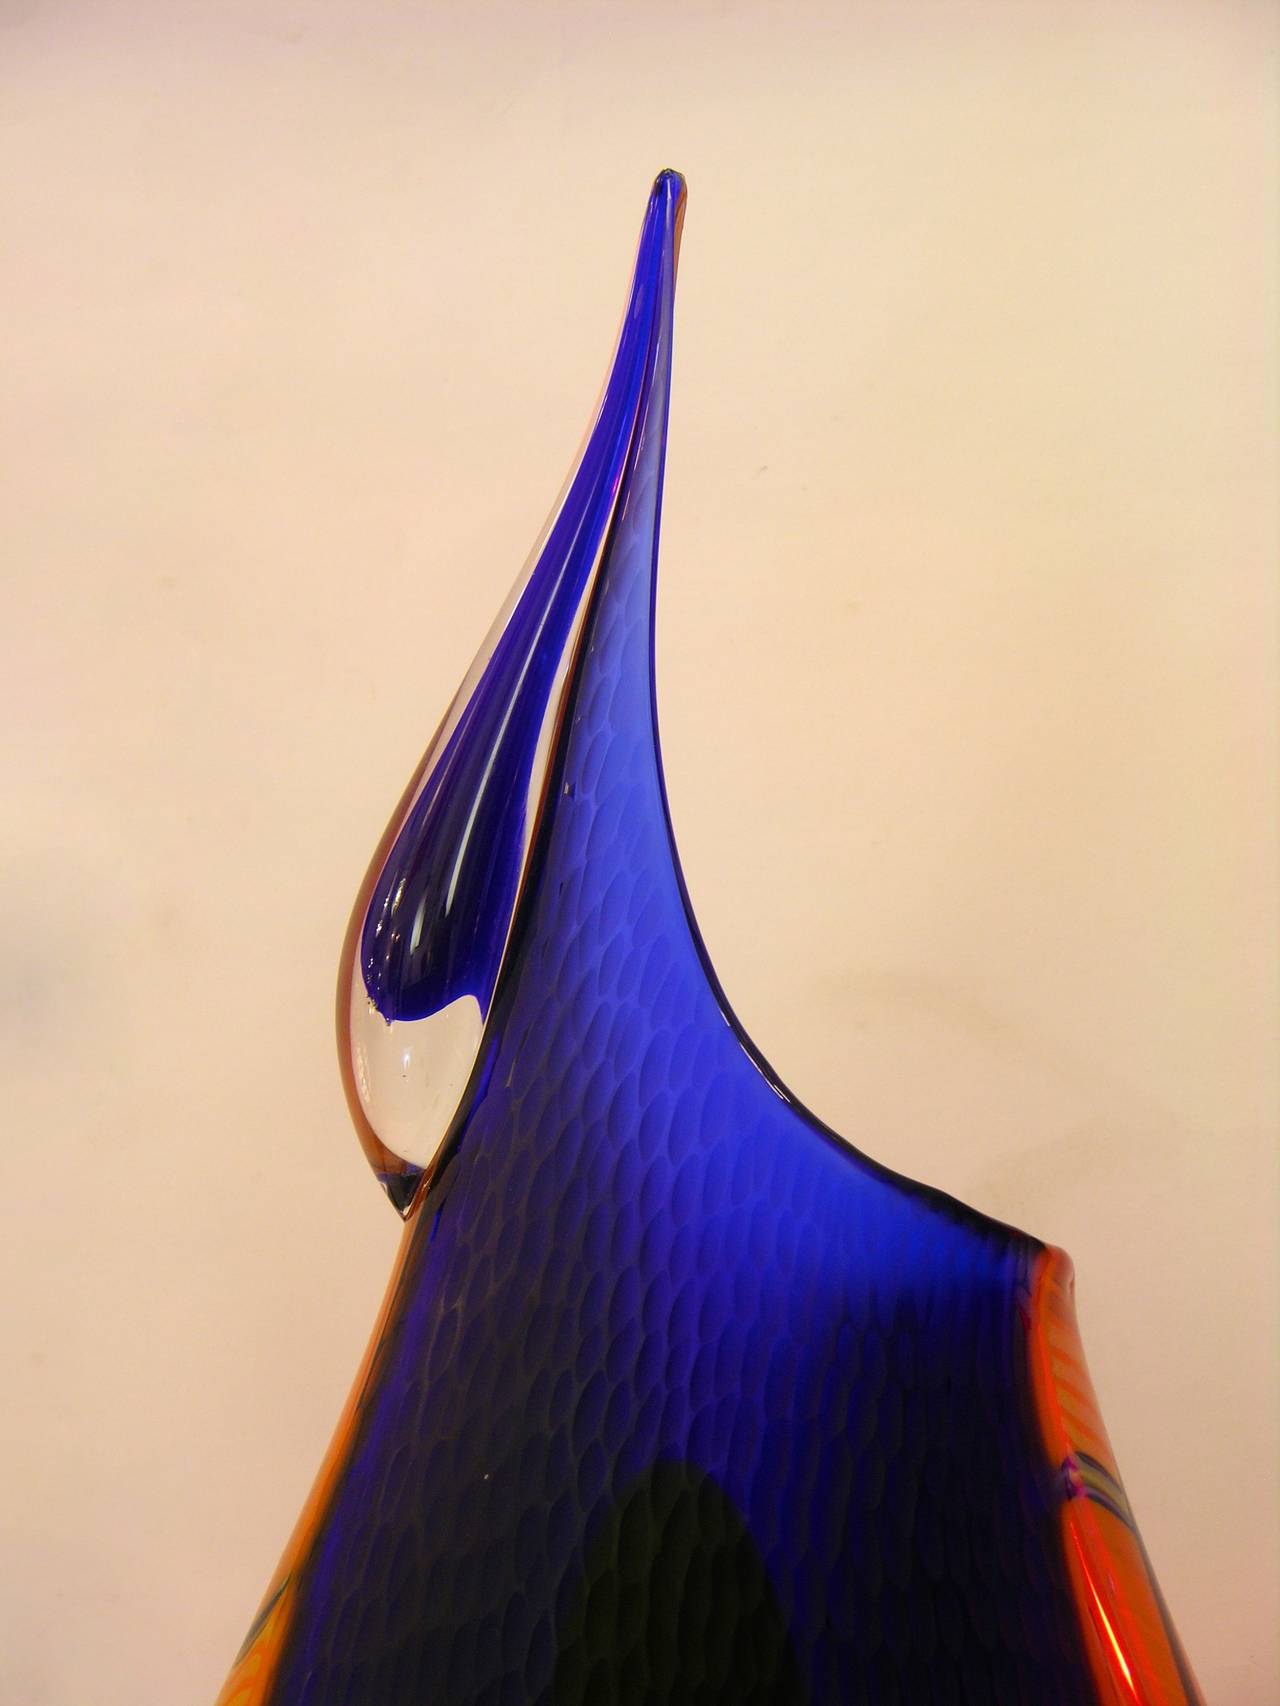 Hand-Crafted Exceptional Mouth Blown Murano Glass Vase by Davide Dona'